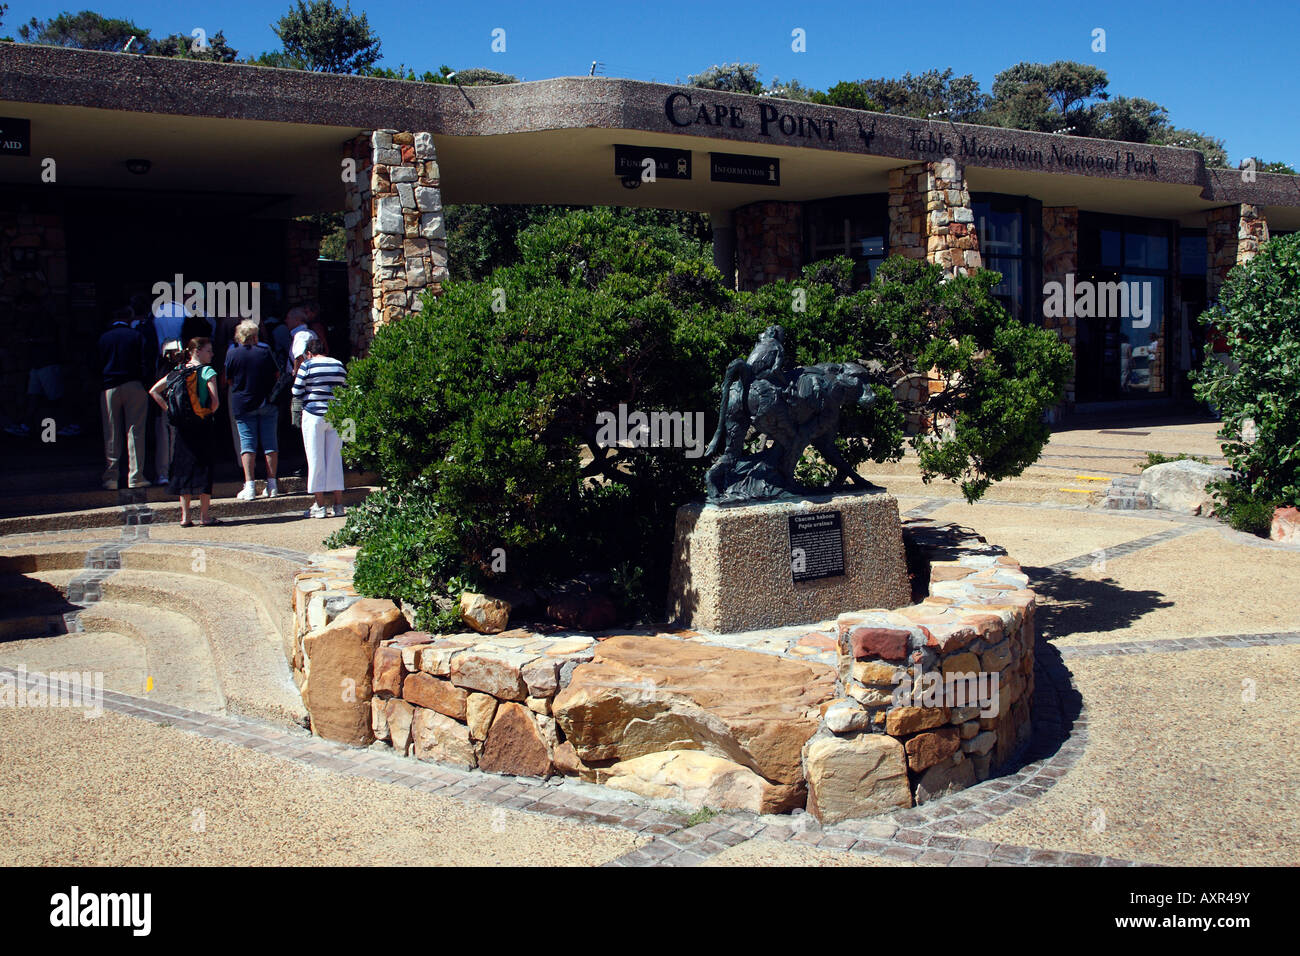 the visitors centre at cape point part of the table mountain national park cape town western cape province south africa Stock Photo